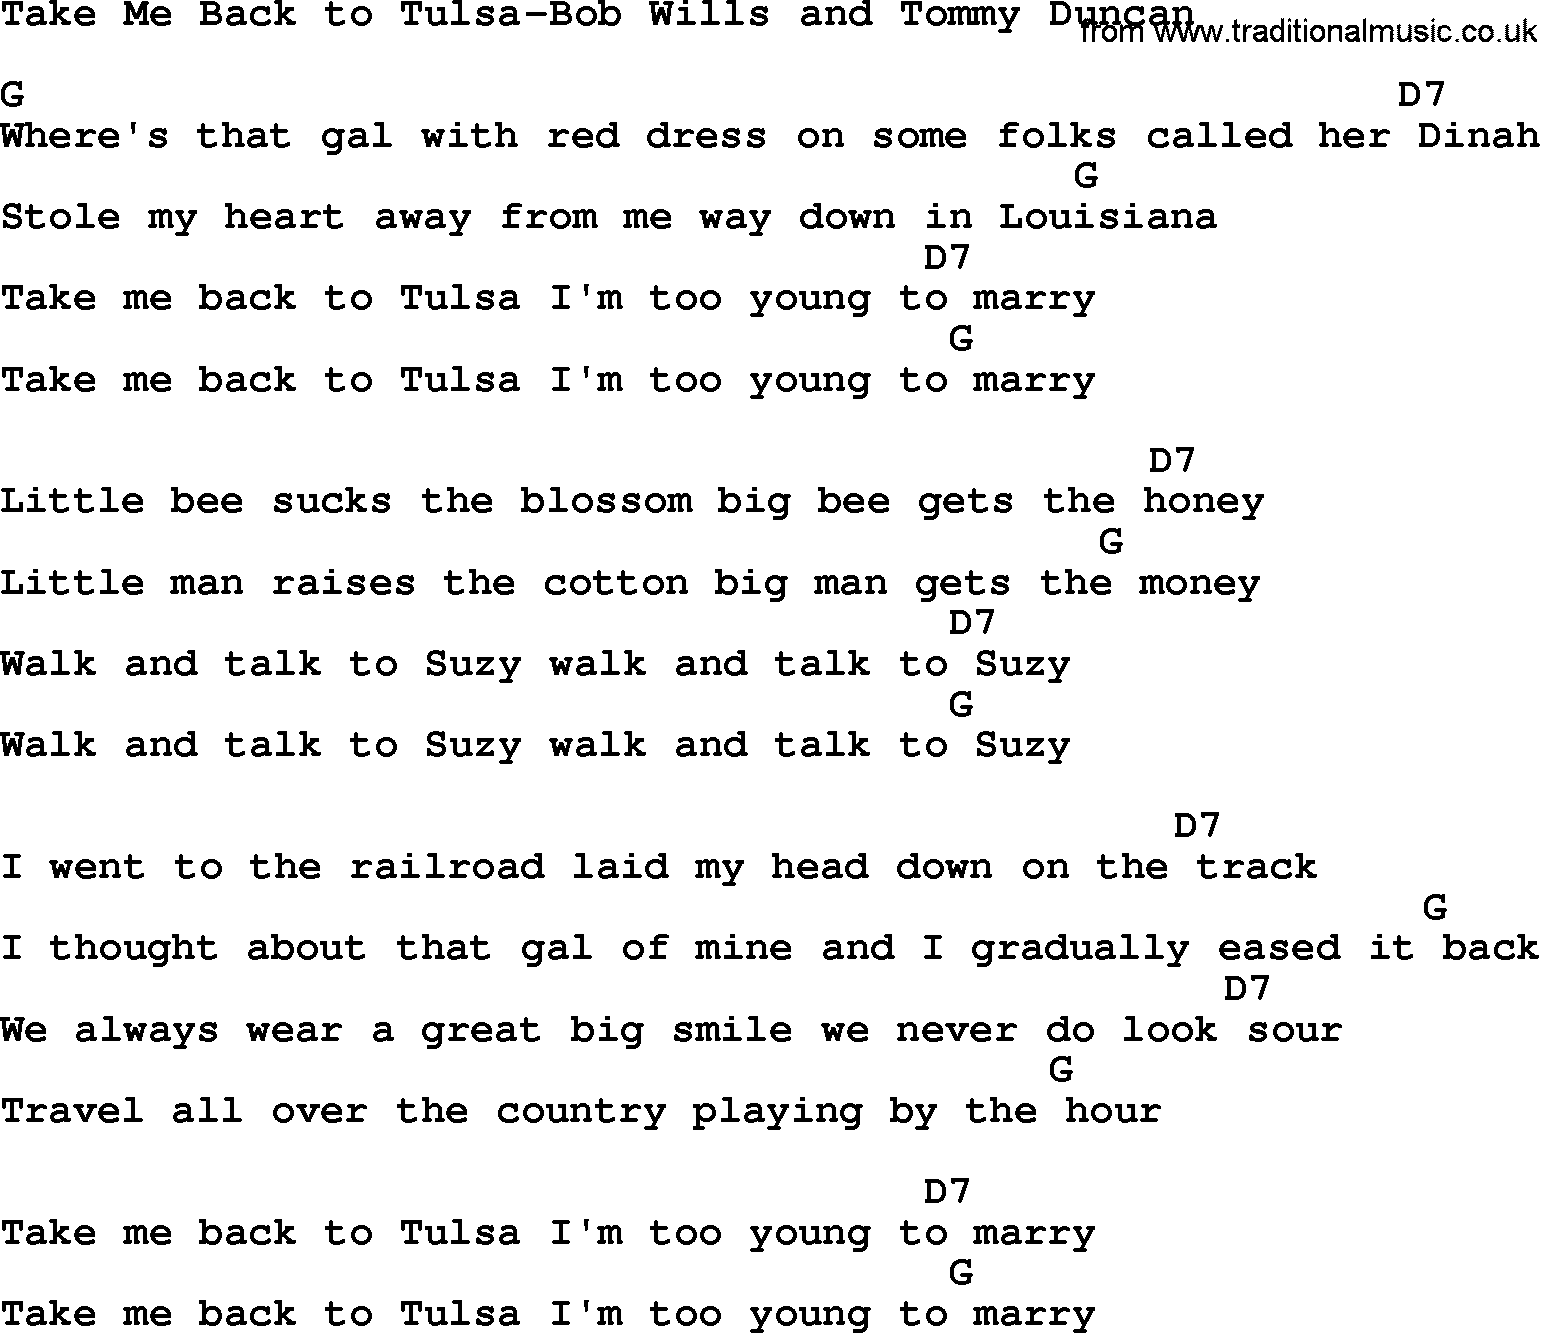 Country music song: Take Me Back To Tulsa-Bob Wills And Tommy Duncan lyrics and chords